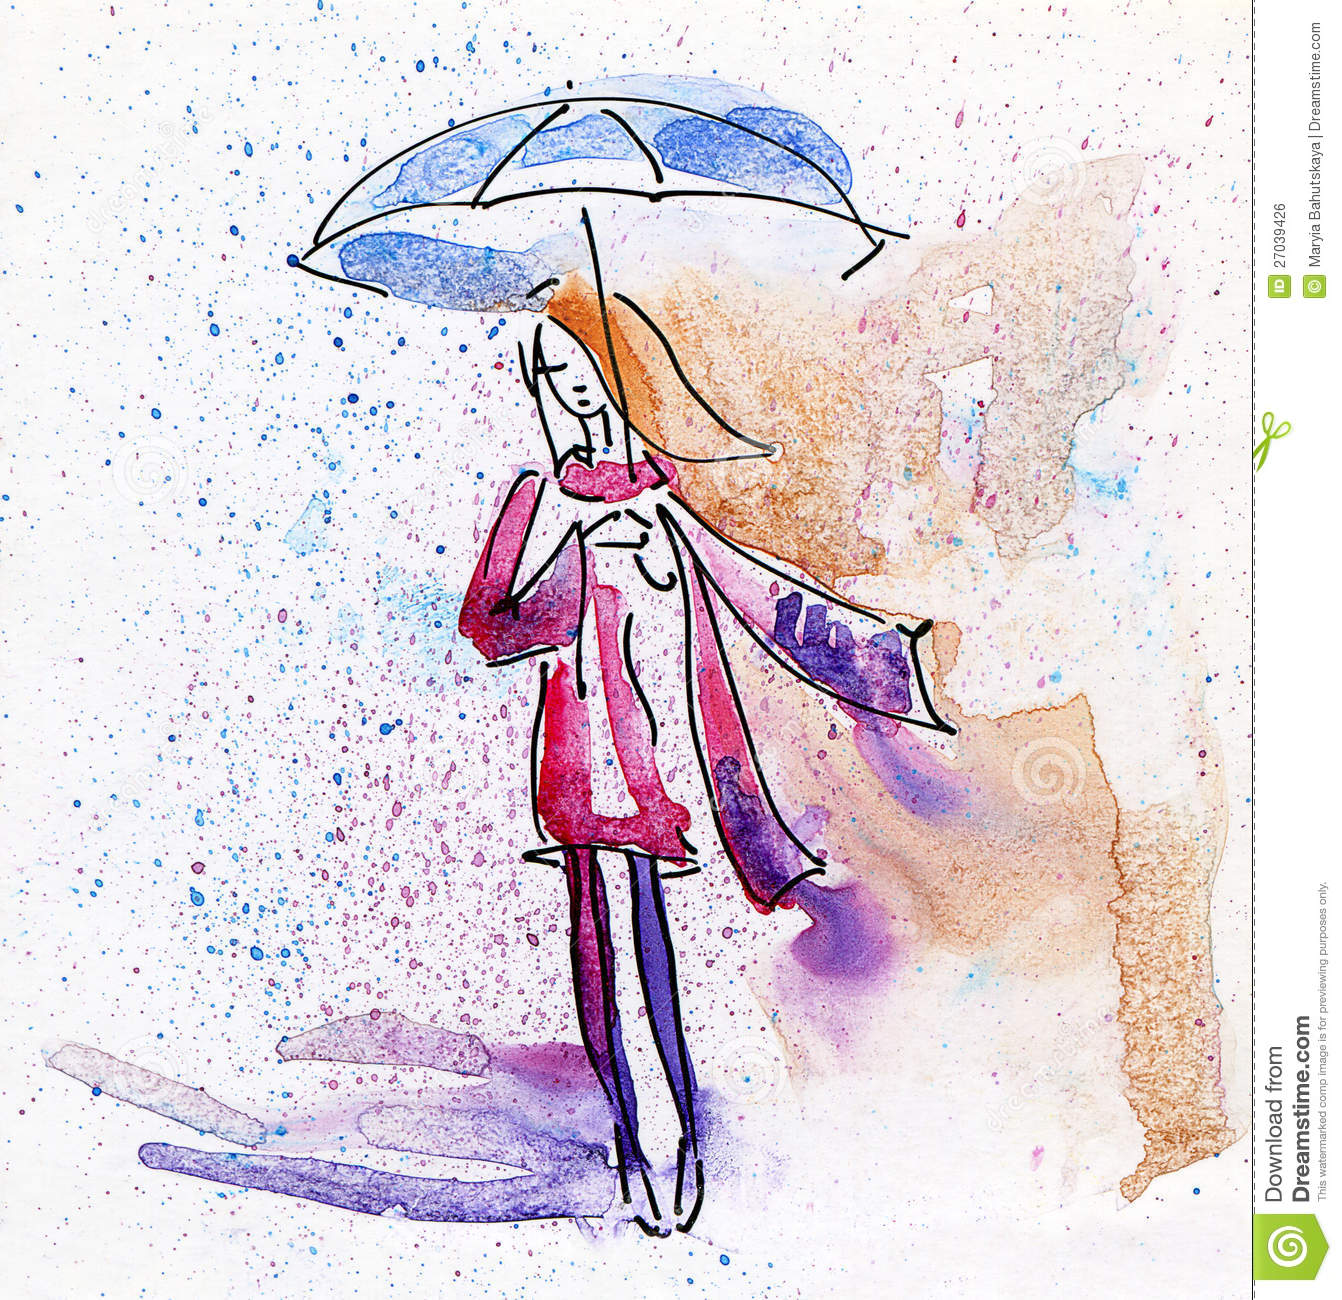 Watercolor Painting  Autumn Girl In The Rain  Royalty Free Stock Image